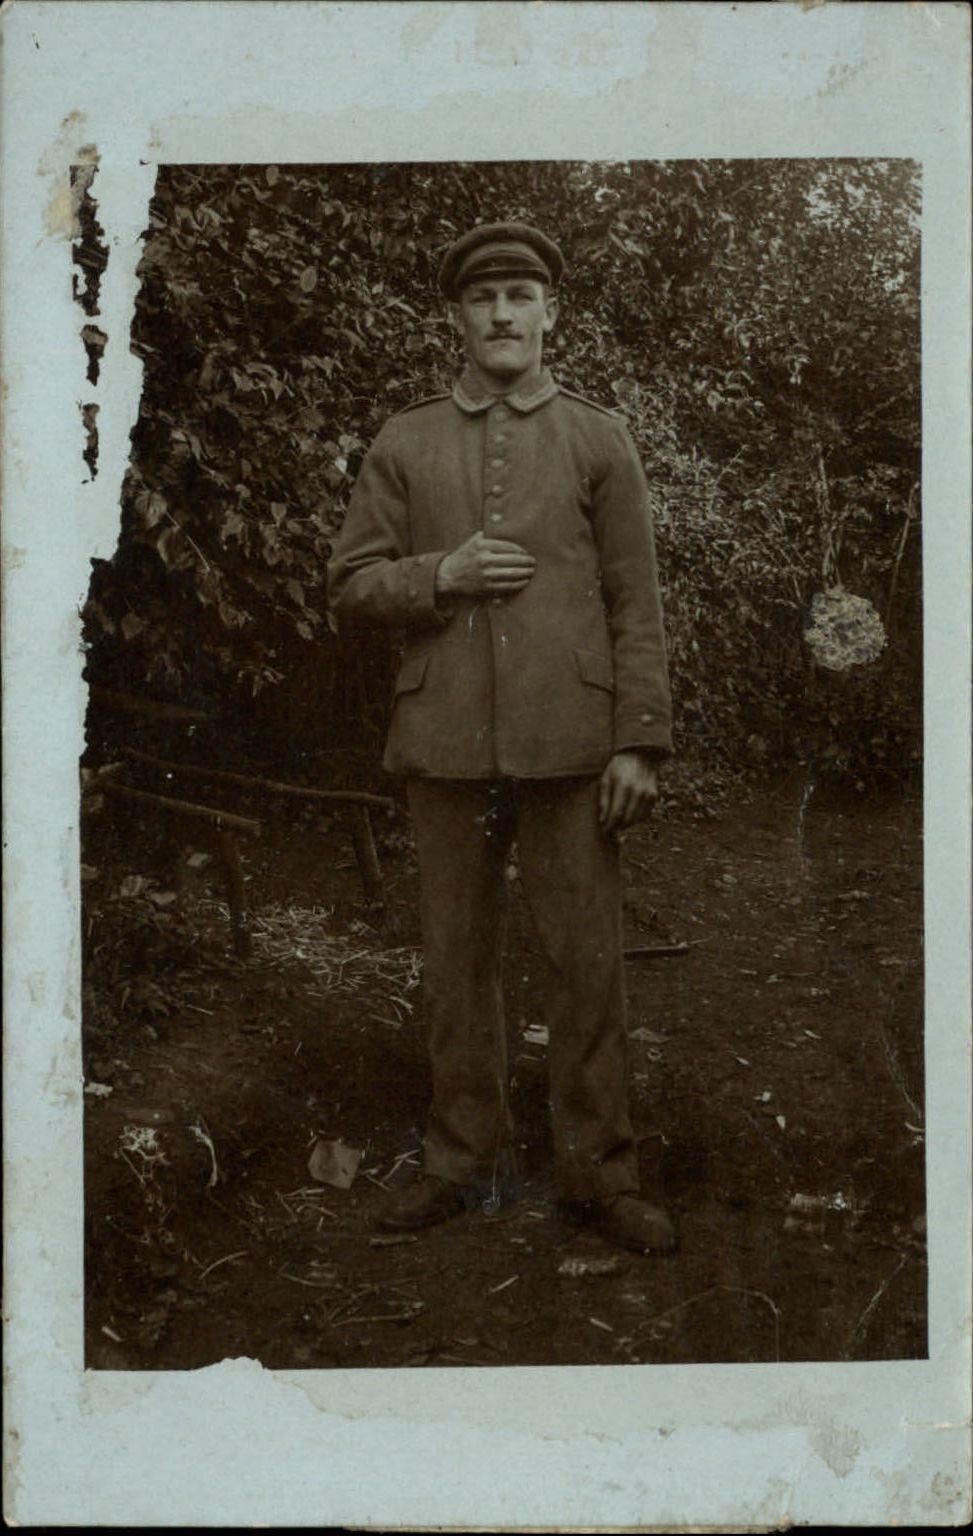 WWI RPPC German soldier standing outside Real Photo postcard message on back